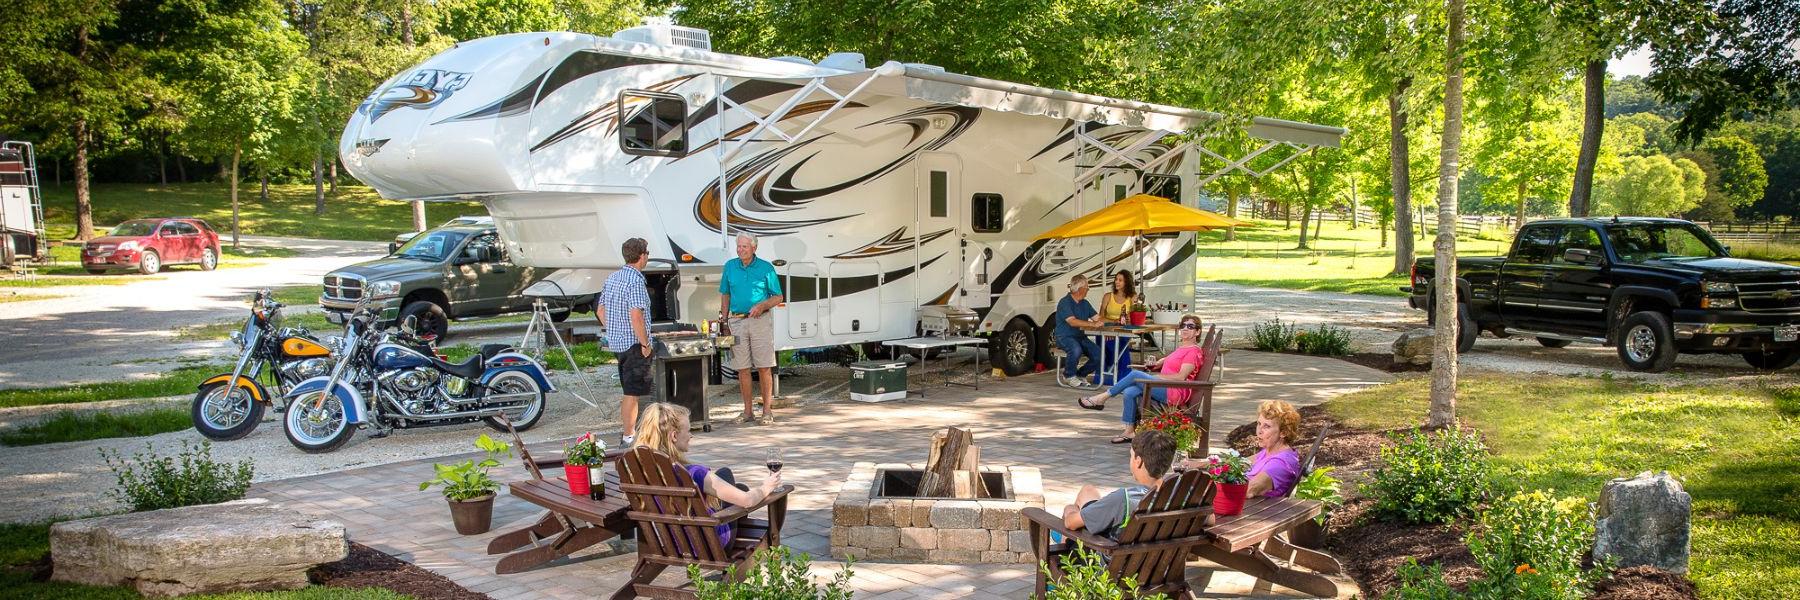 A family enjoys a stop in St. Louis on their RV adventure.